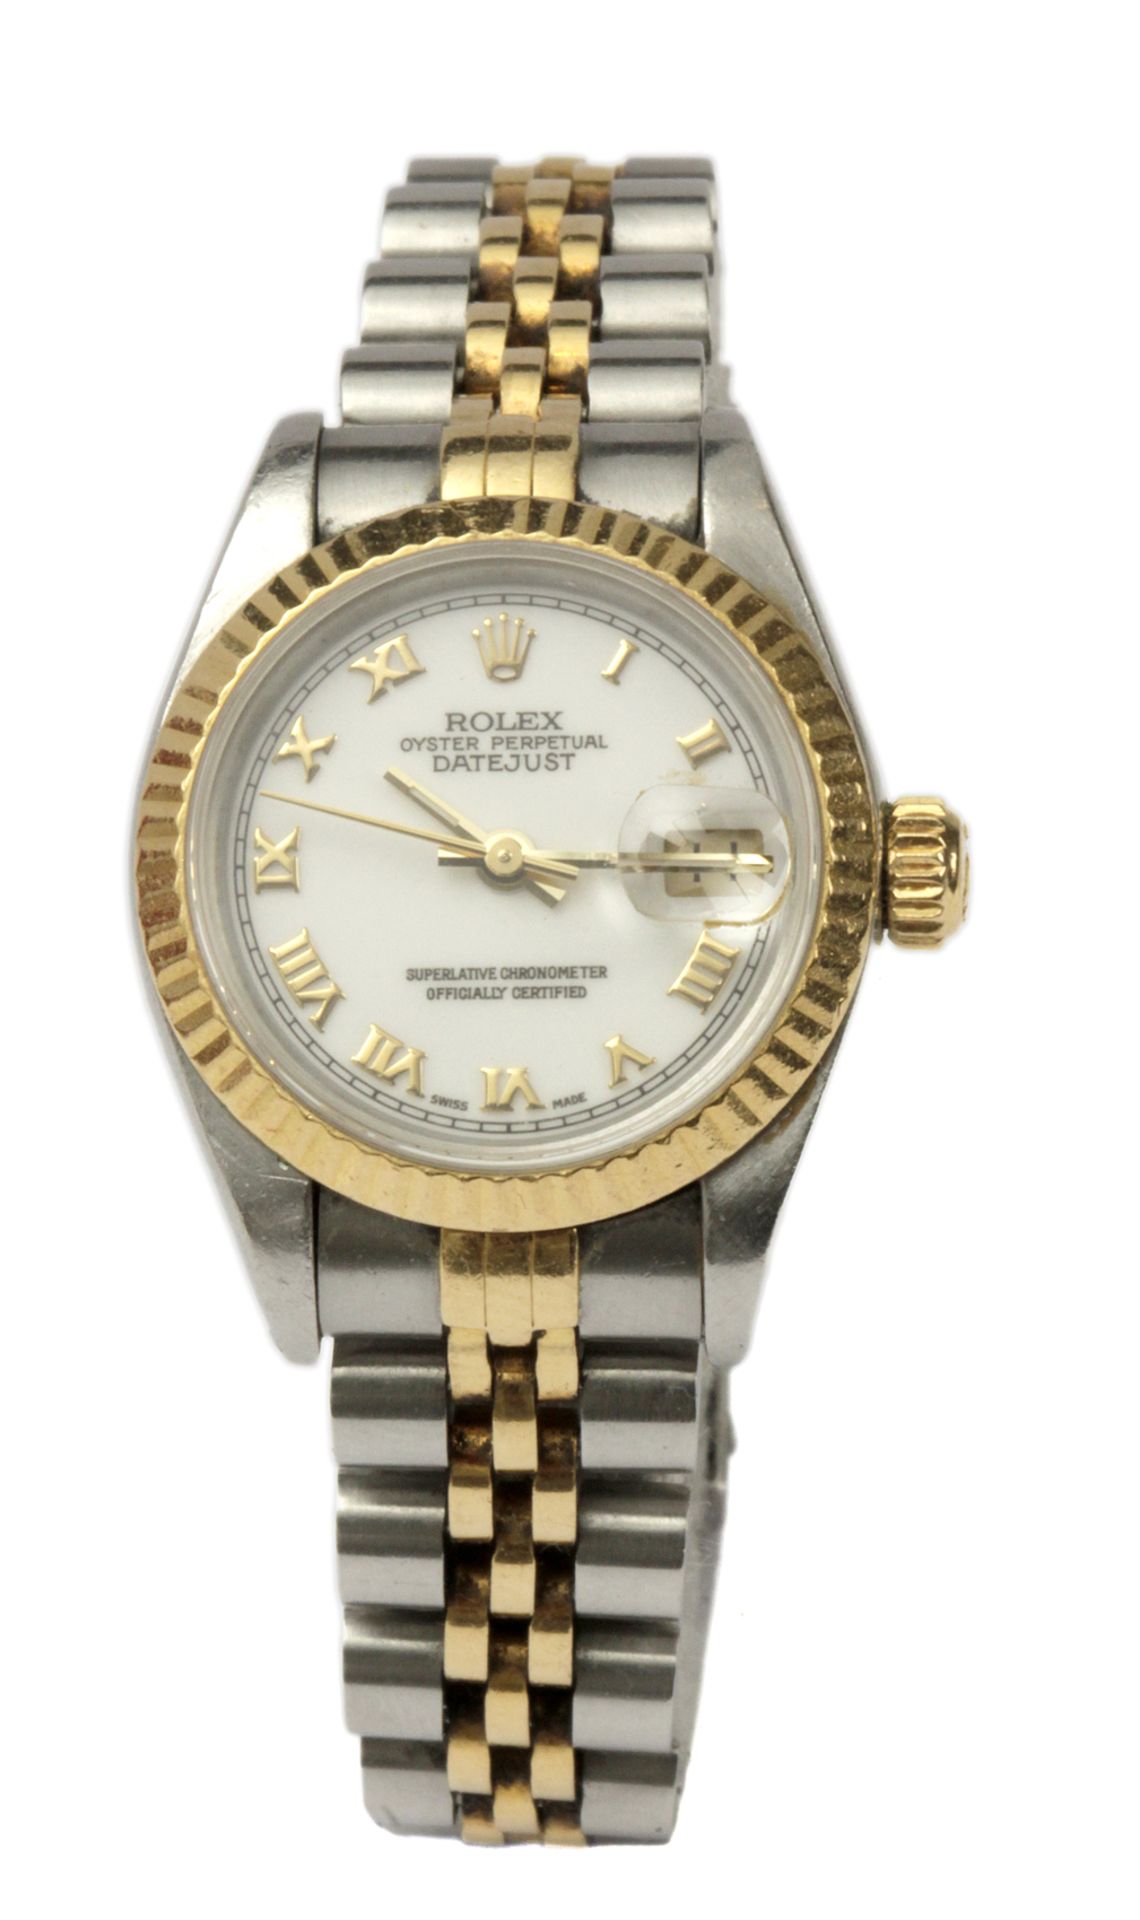 A ladies Rolex Oyster Perpetual Date Just, 1993